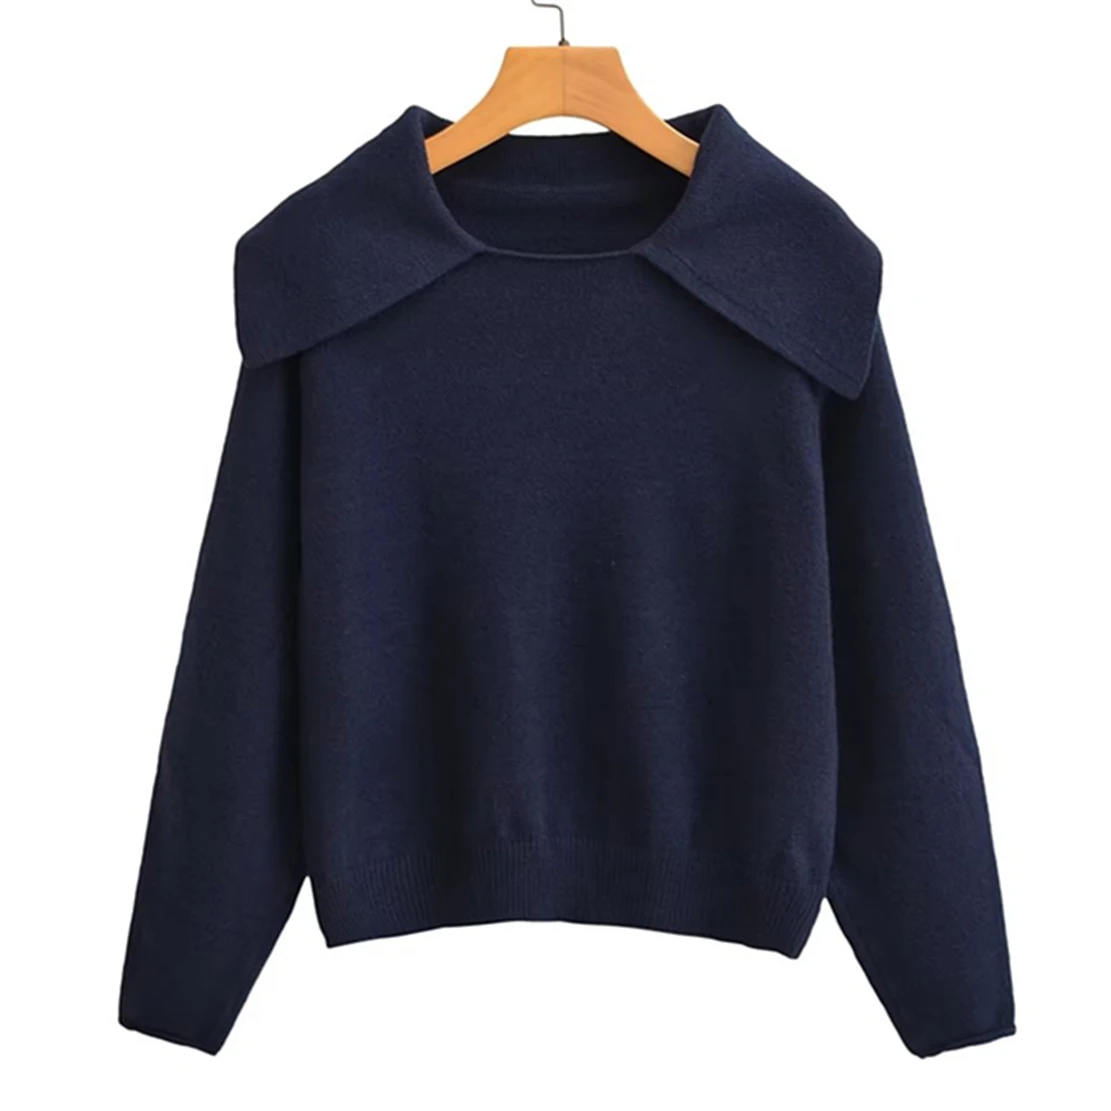 

Elmsk England Style Peter Pan Collar Knitwear Casual Navy Color Sweaters Women